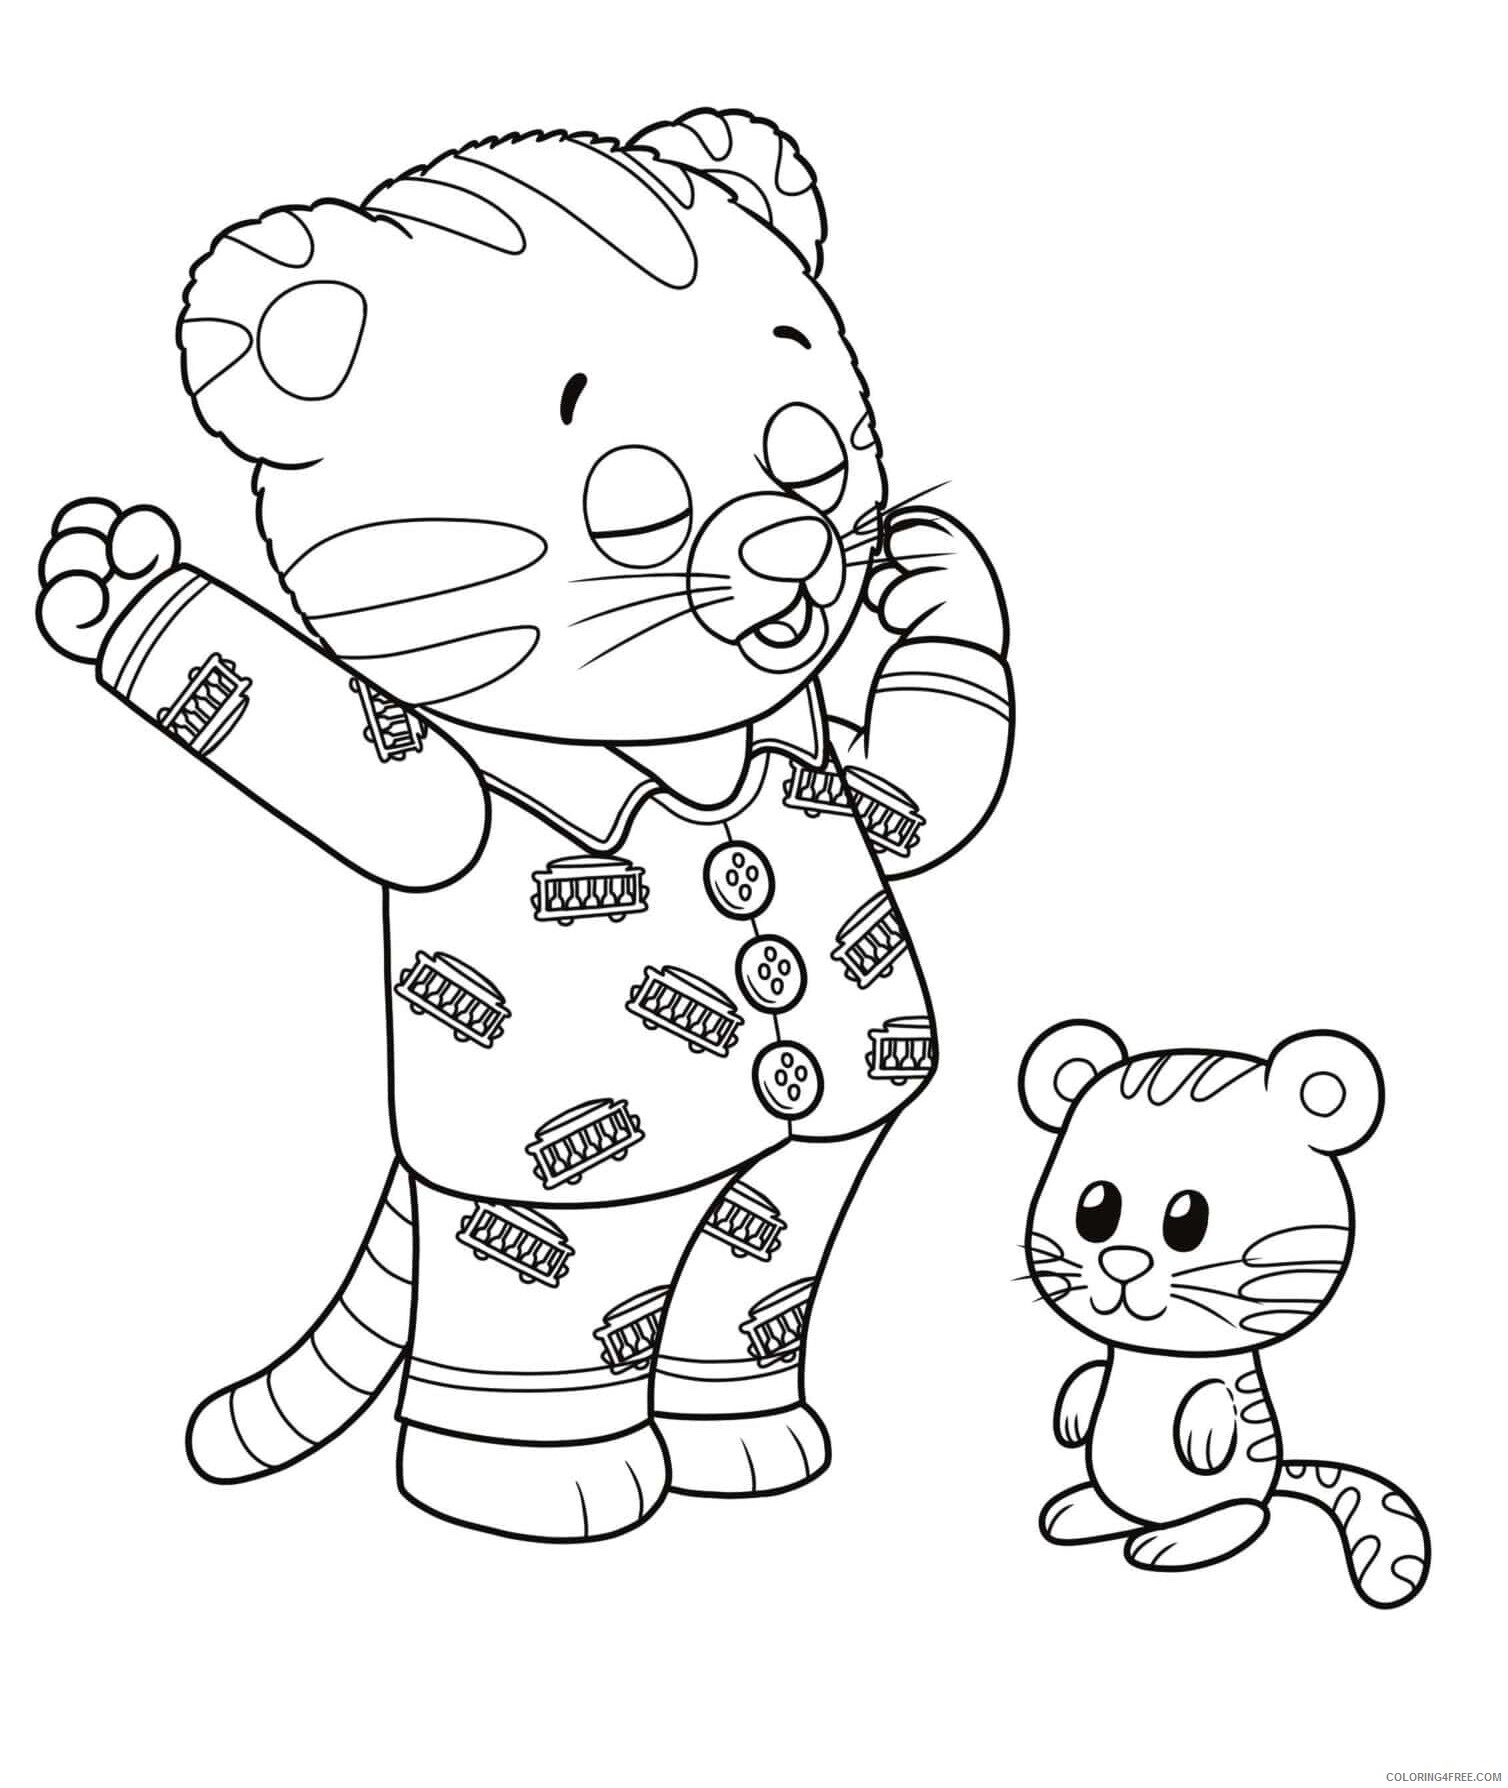 Daniel Tiger Coloring Pages TV Film good night Printable 2020 02338 Coloring4free